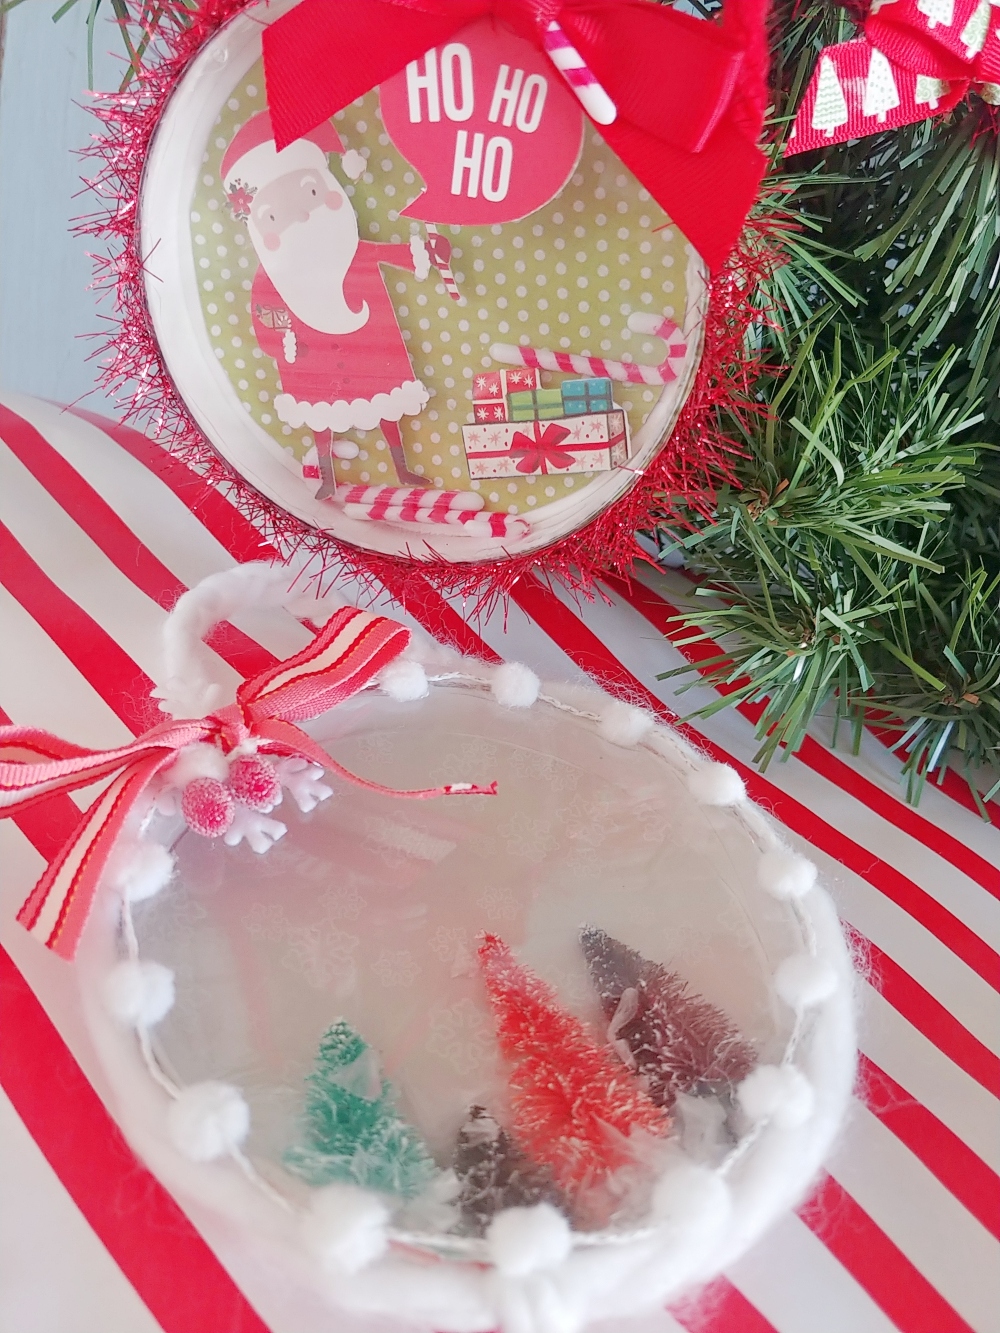 Snow Globe Ornaments From Recycled Ice Cream Lids!